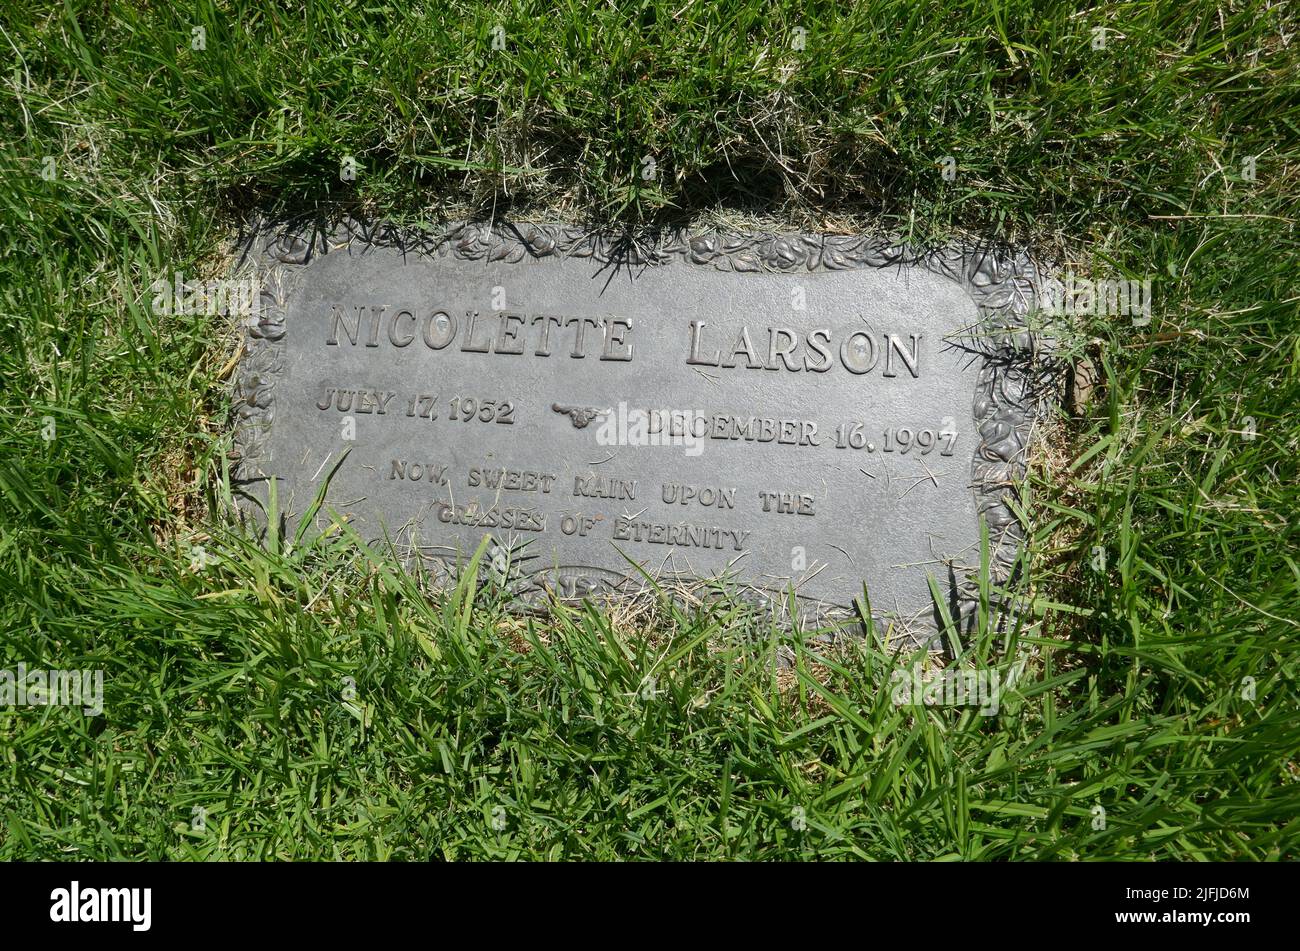 Los Angeles, California, USA 19th June 2022 Singer Nicolette Larson's Grave in Murmuring Trees Section at Forest Lawn Memorial Park Hollywood Hills on June 19, 2022 in Los Angeles, California, USA. Photo by Barry King/Alamy Stock Photo Stock Photo